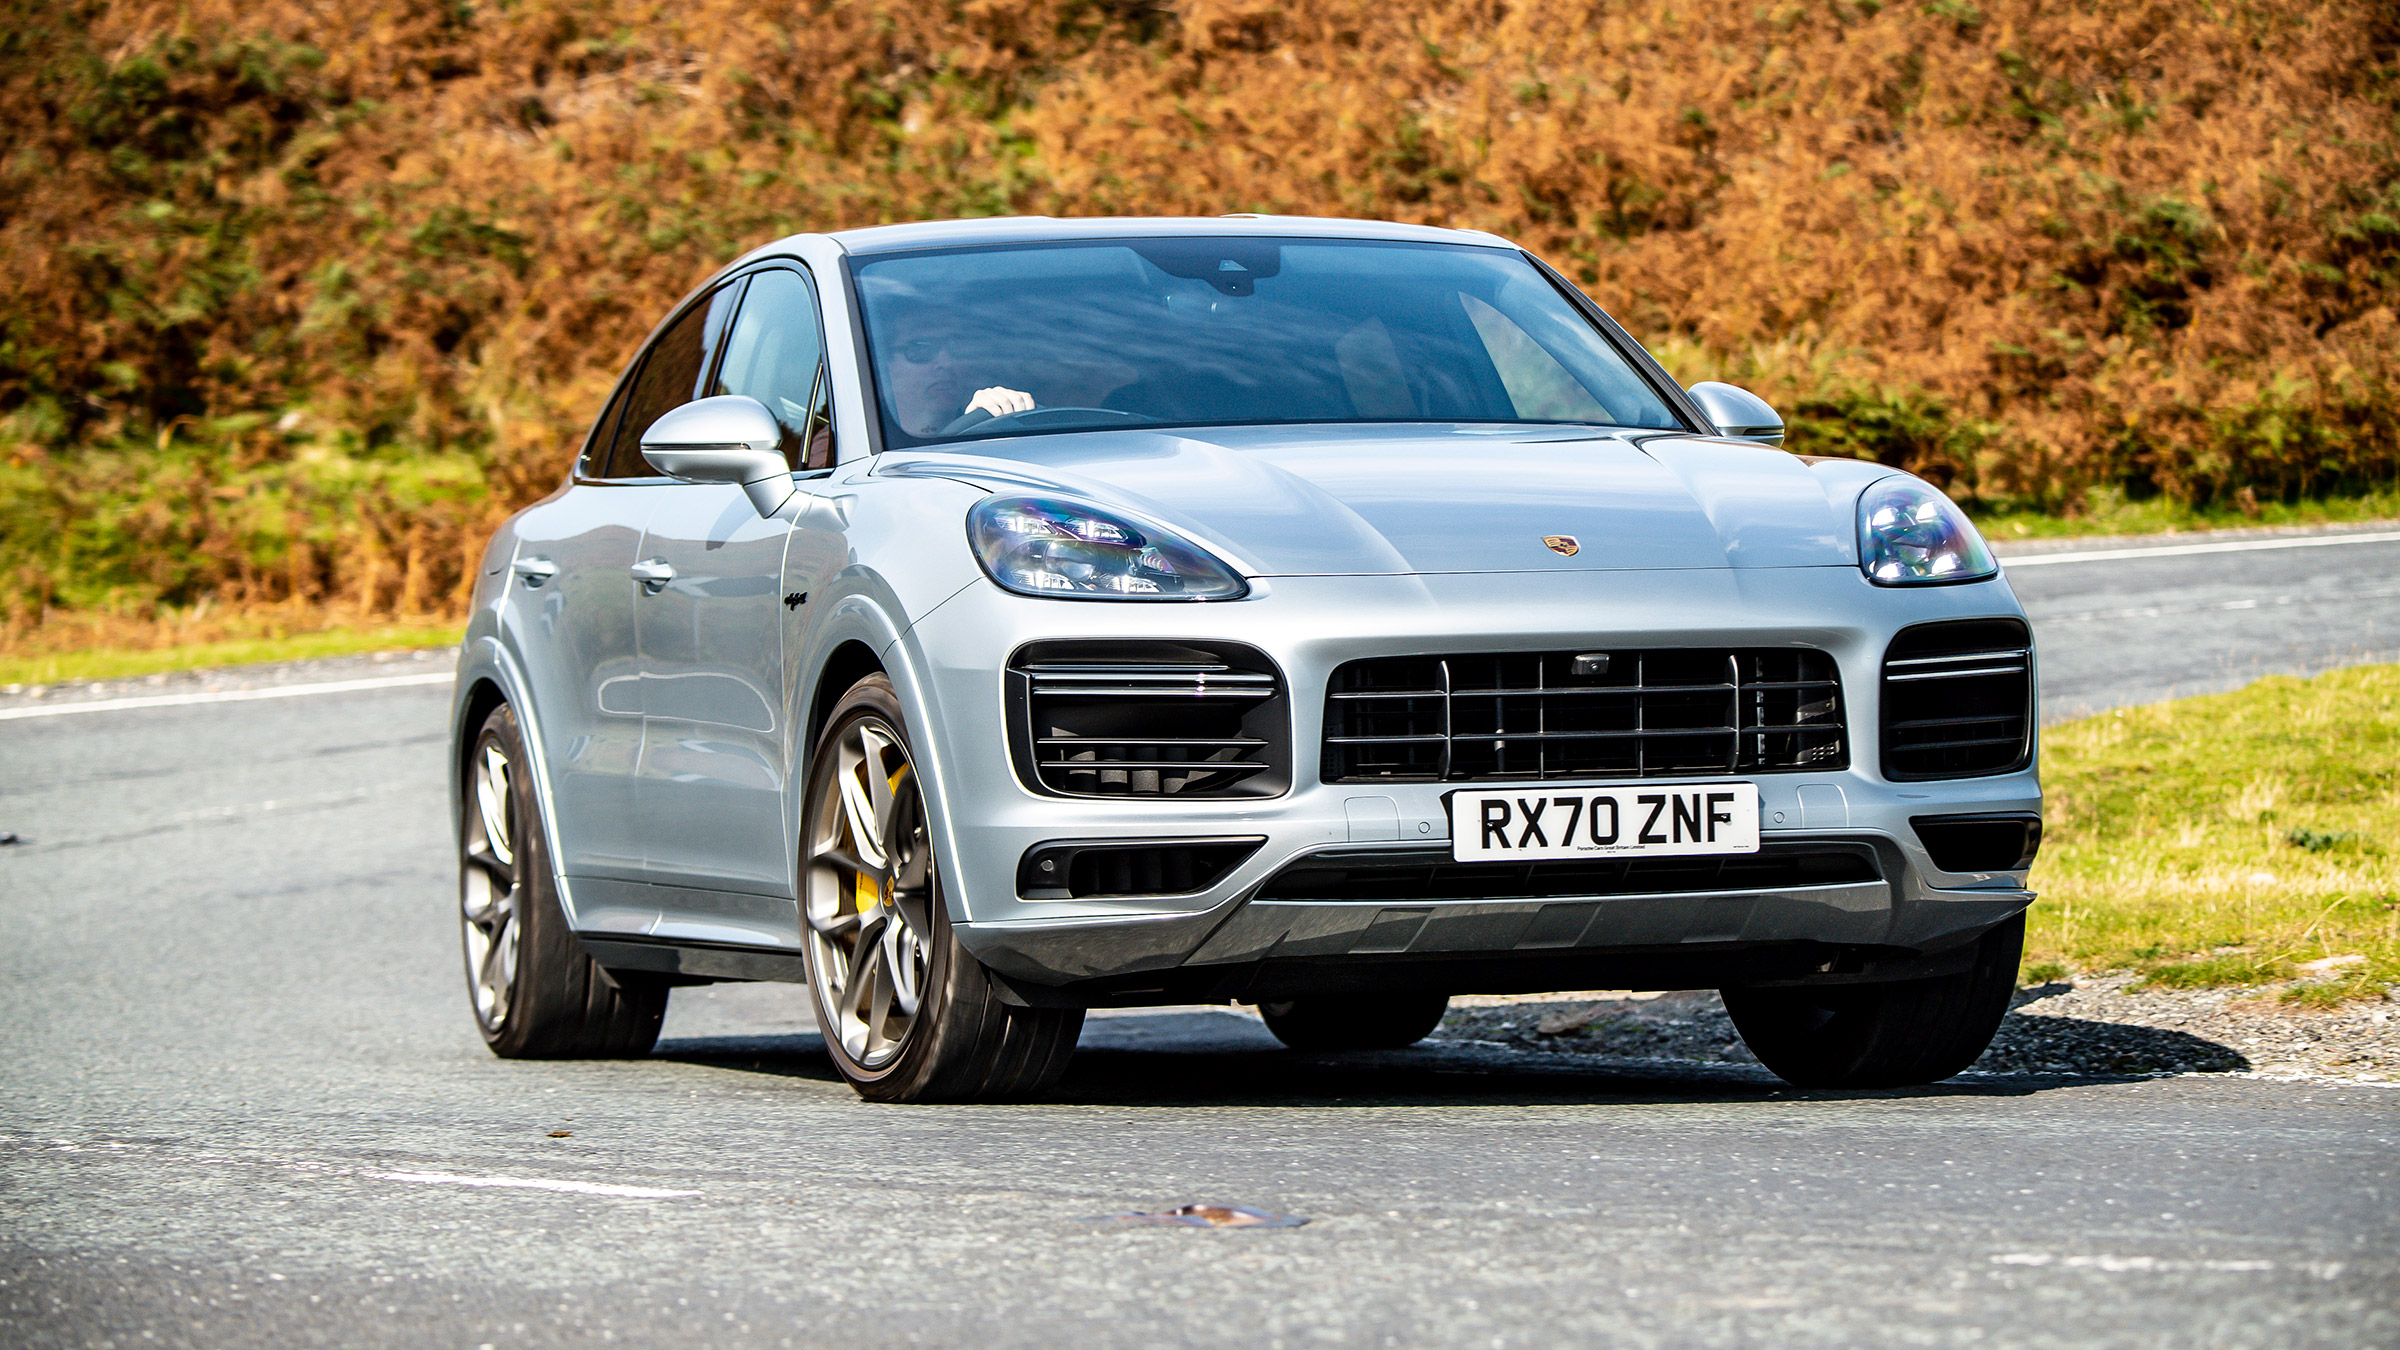 Porsche Cayenne review if you’ve got to go SUV, this is